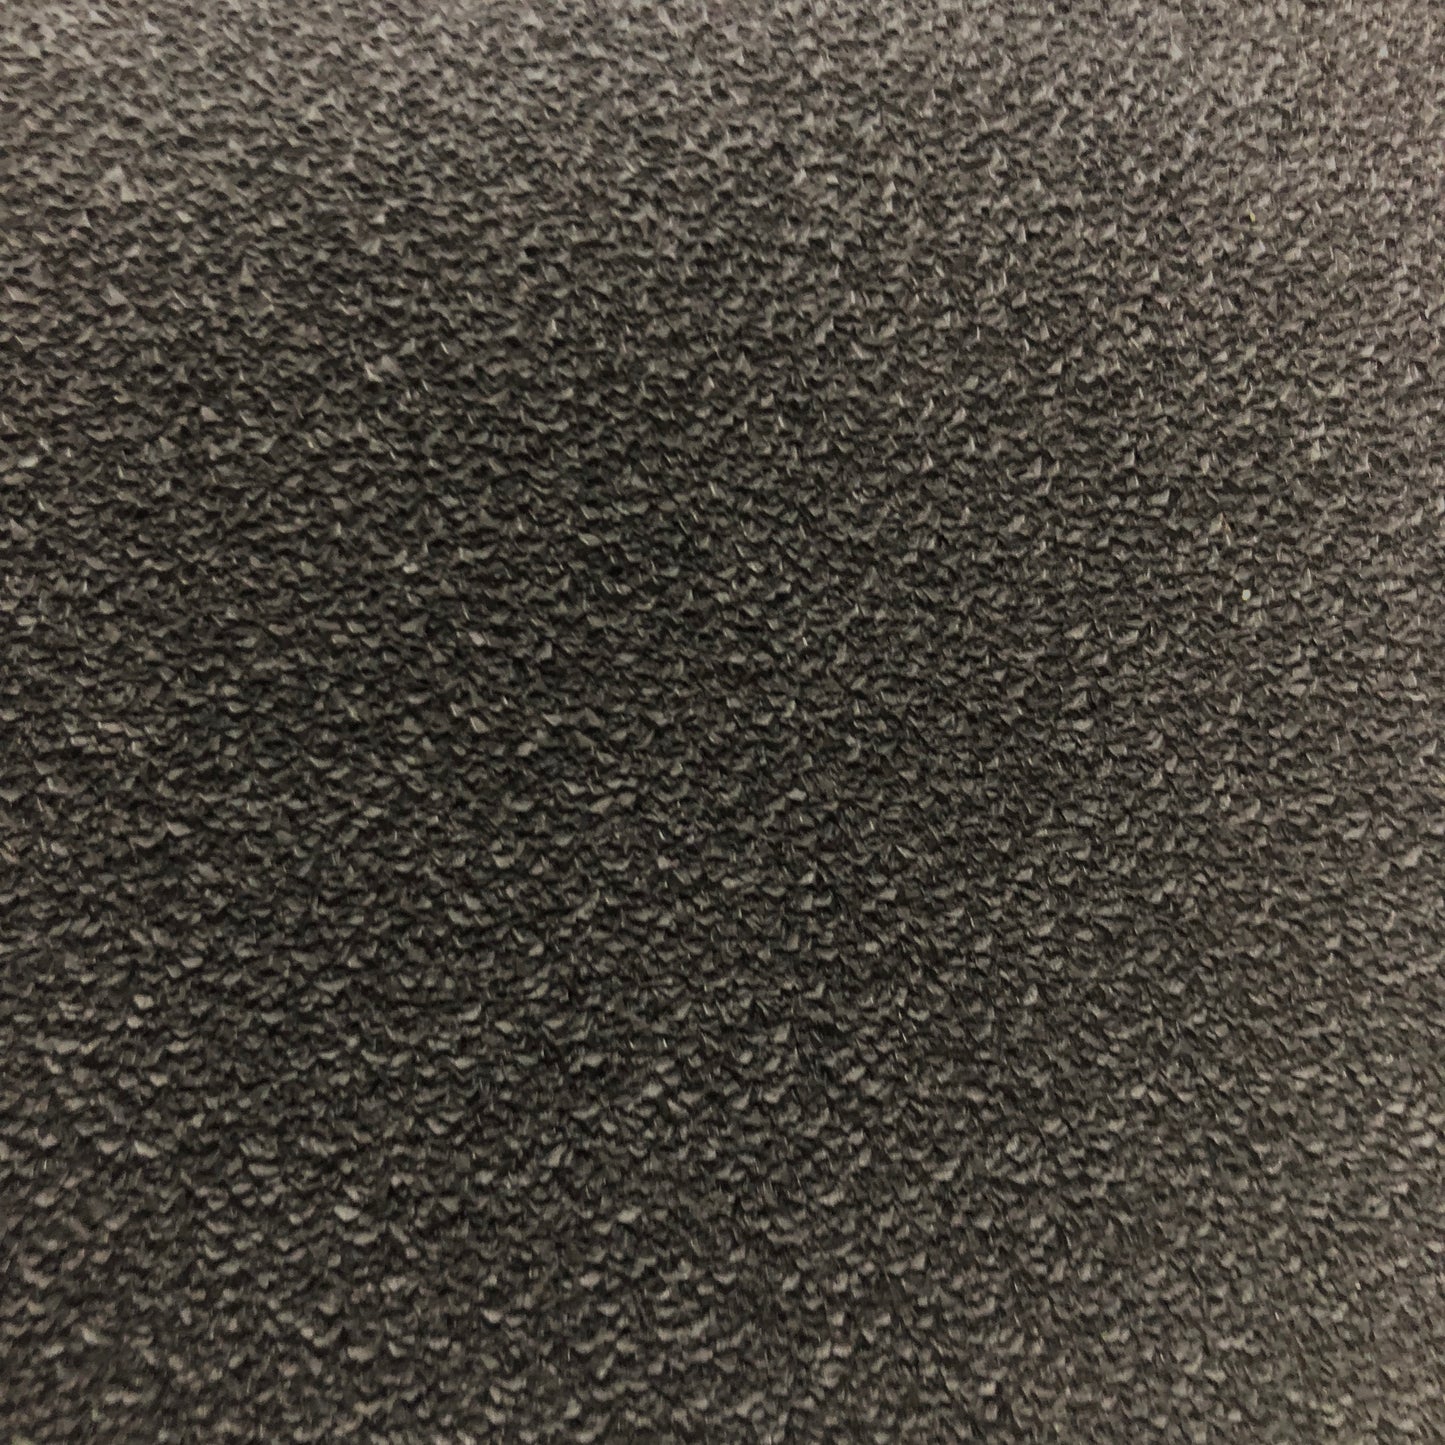 Non-slip Material  with a 600 X 300 polyester backing - Black (Sold per 1/2 yard)